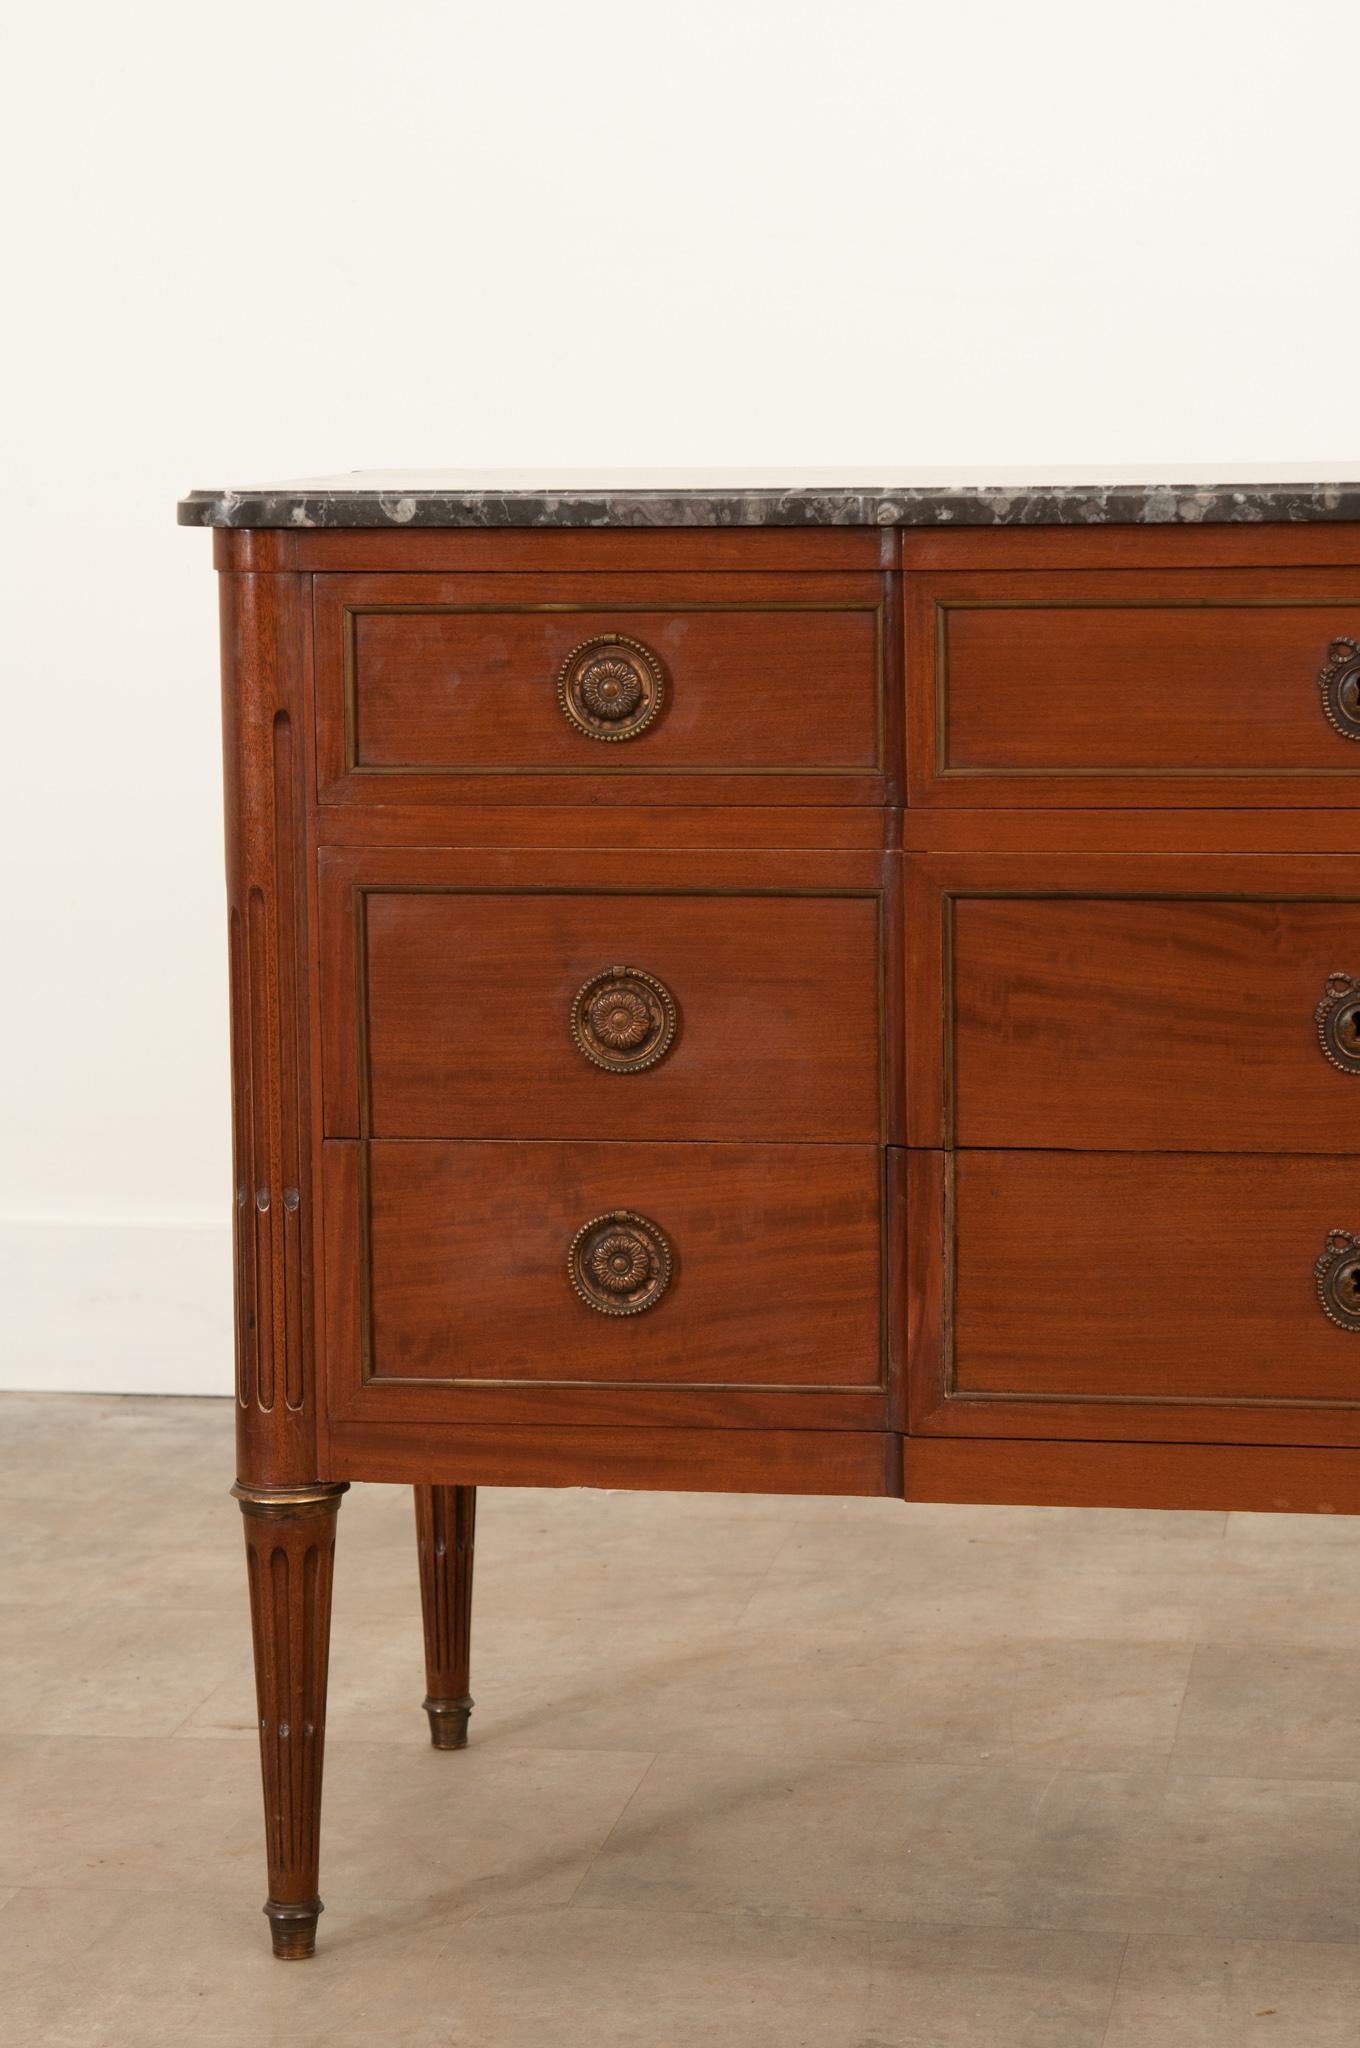 French Louis XVI Style Mahogany Commode In Good Condition For Sale In Baton Rouge, LA